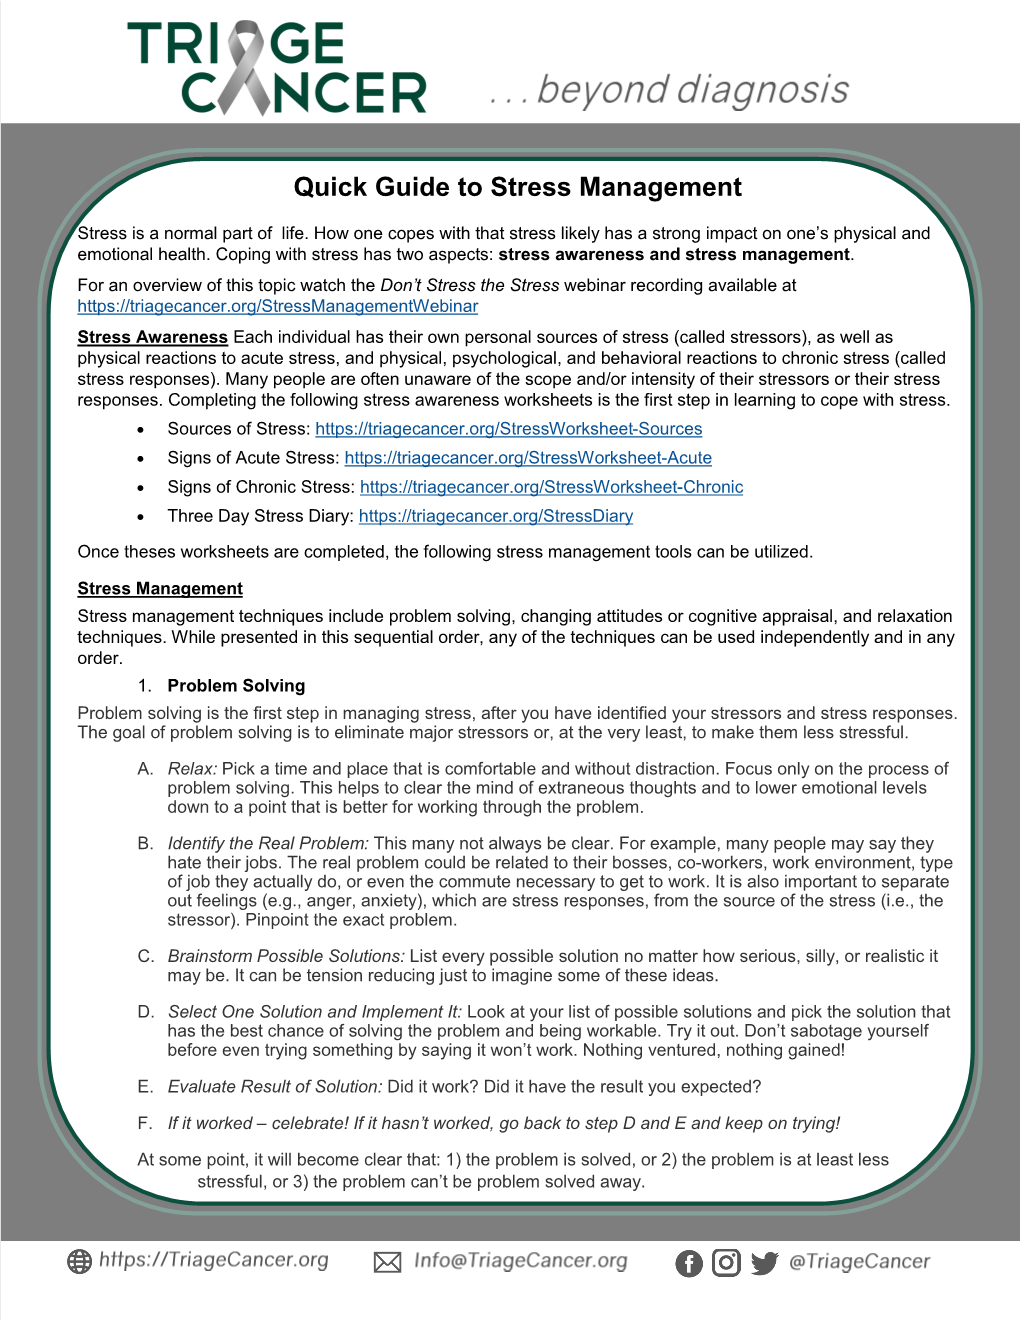 Quick Guide to Stress Management